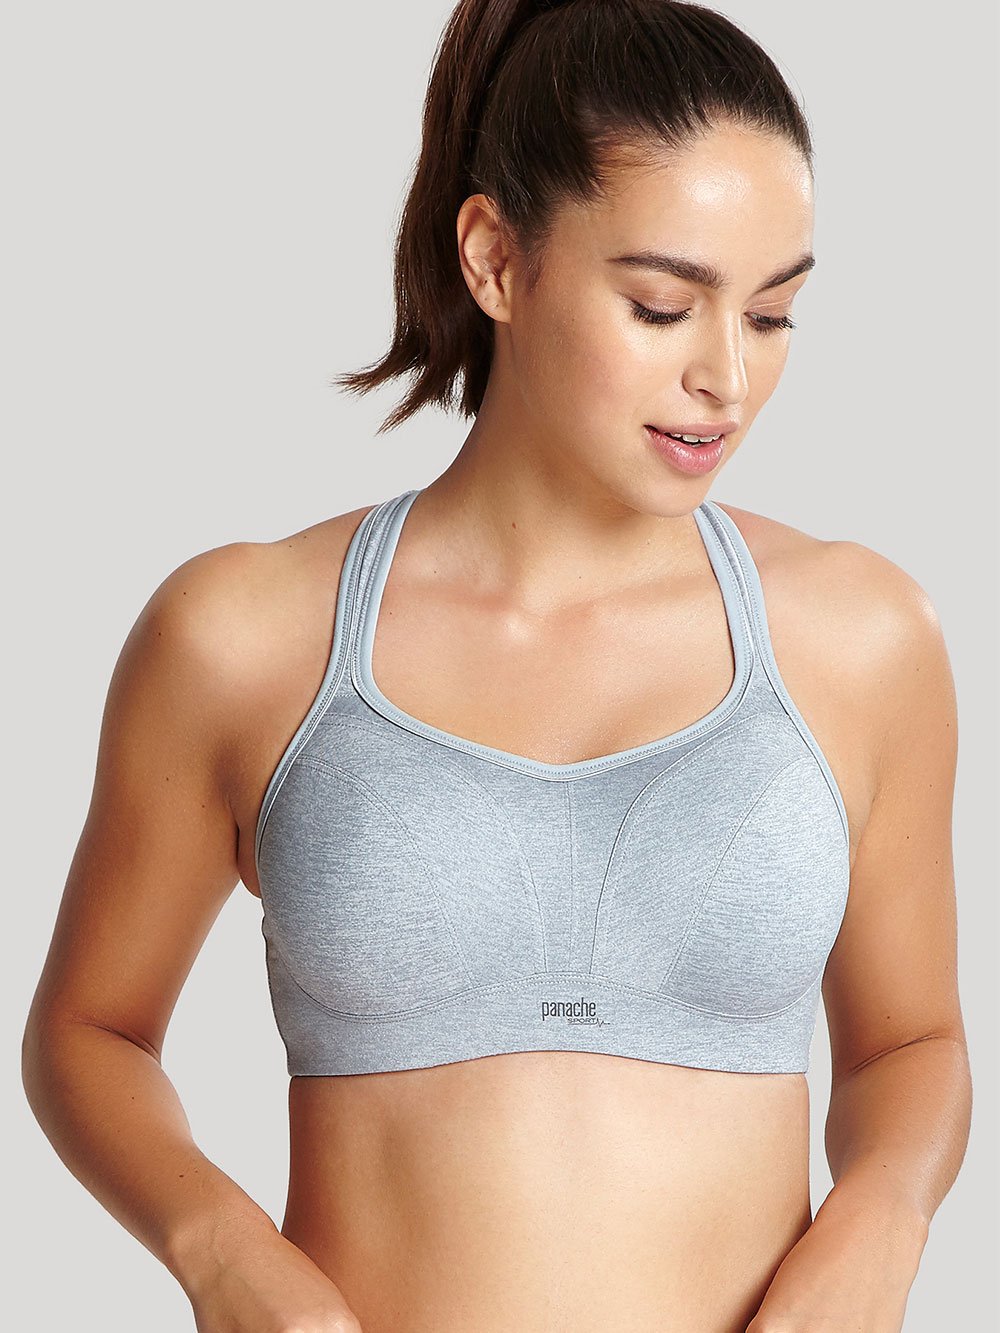 Gore doesn't tack, cups too big, shape difference? 30FF - Panache Sport »  Sports Bra (5021)